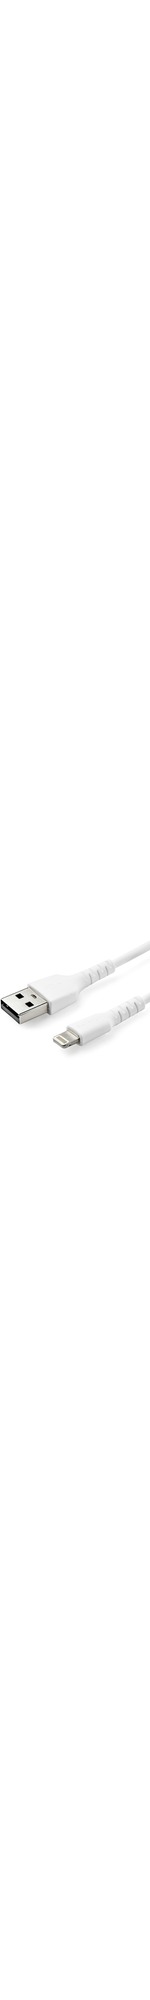 StarTech.com 3 foot/1m Durable White USB-A to Lightning Cable, Rugged Heavy Duty Charging/Sync Cable for Apple iPhone/iPad MFi Certified - Kevlar aramid fiber shelte